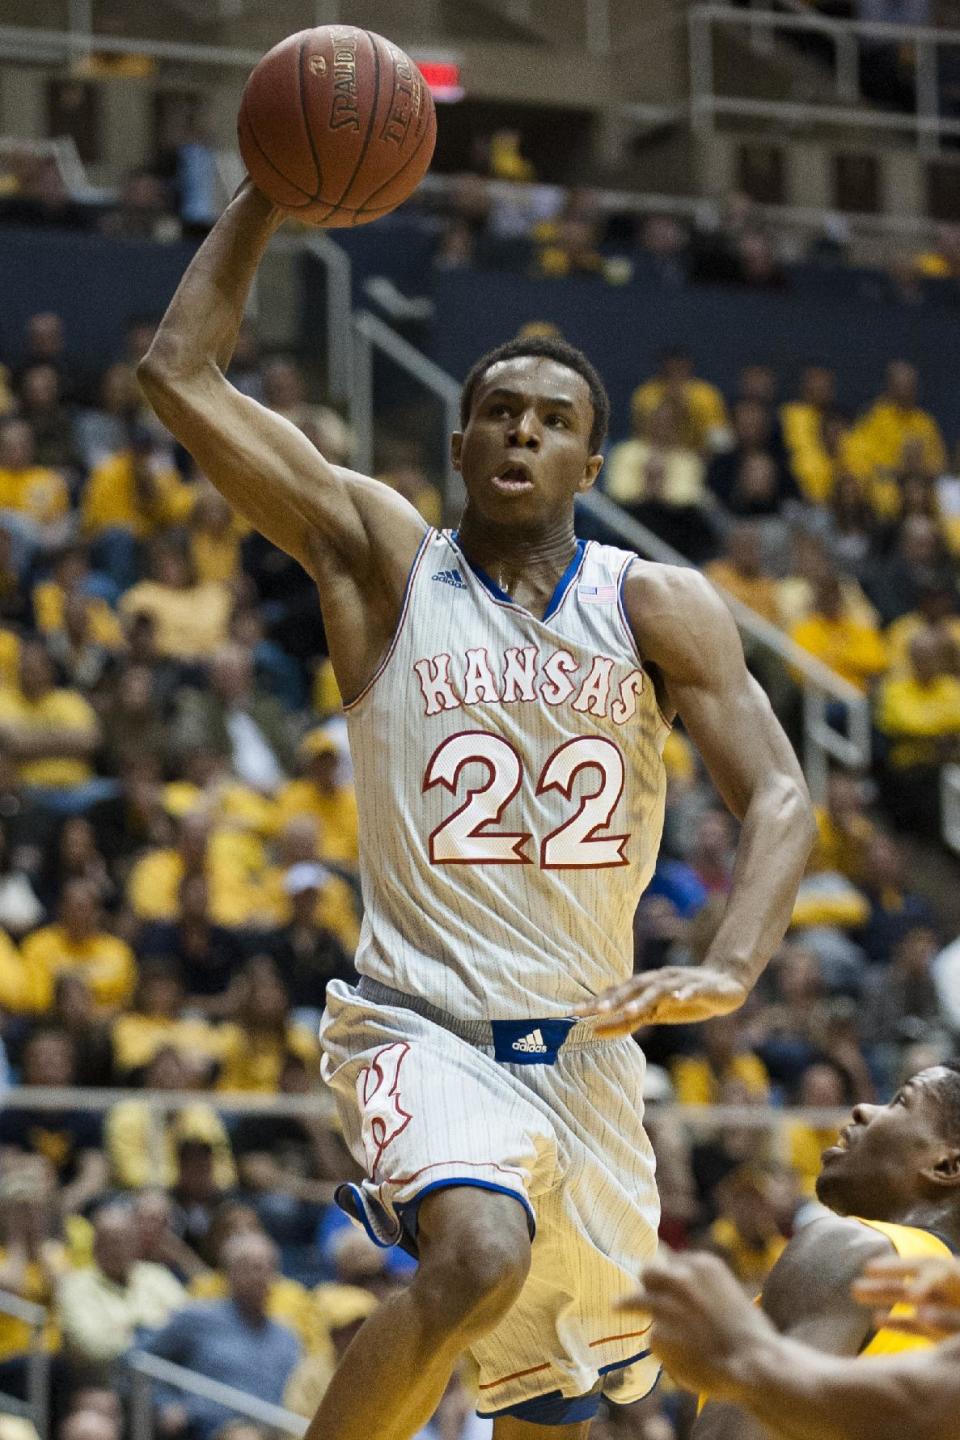 Kansas' Andrew Wiggins (22) drives to the basket during the first half of an NCAA college basketball game against West Virginia, Saturday, March 8, 2014, in Morgantown, W.Va. (AP Photo/Andrew Ferguson)